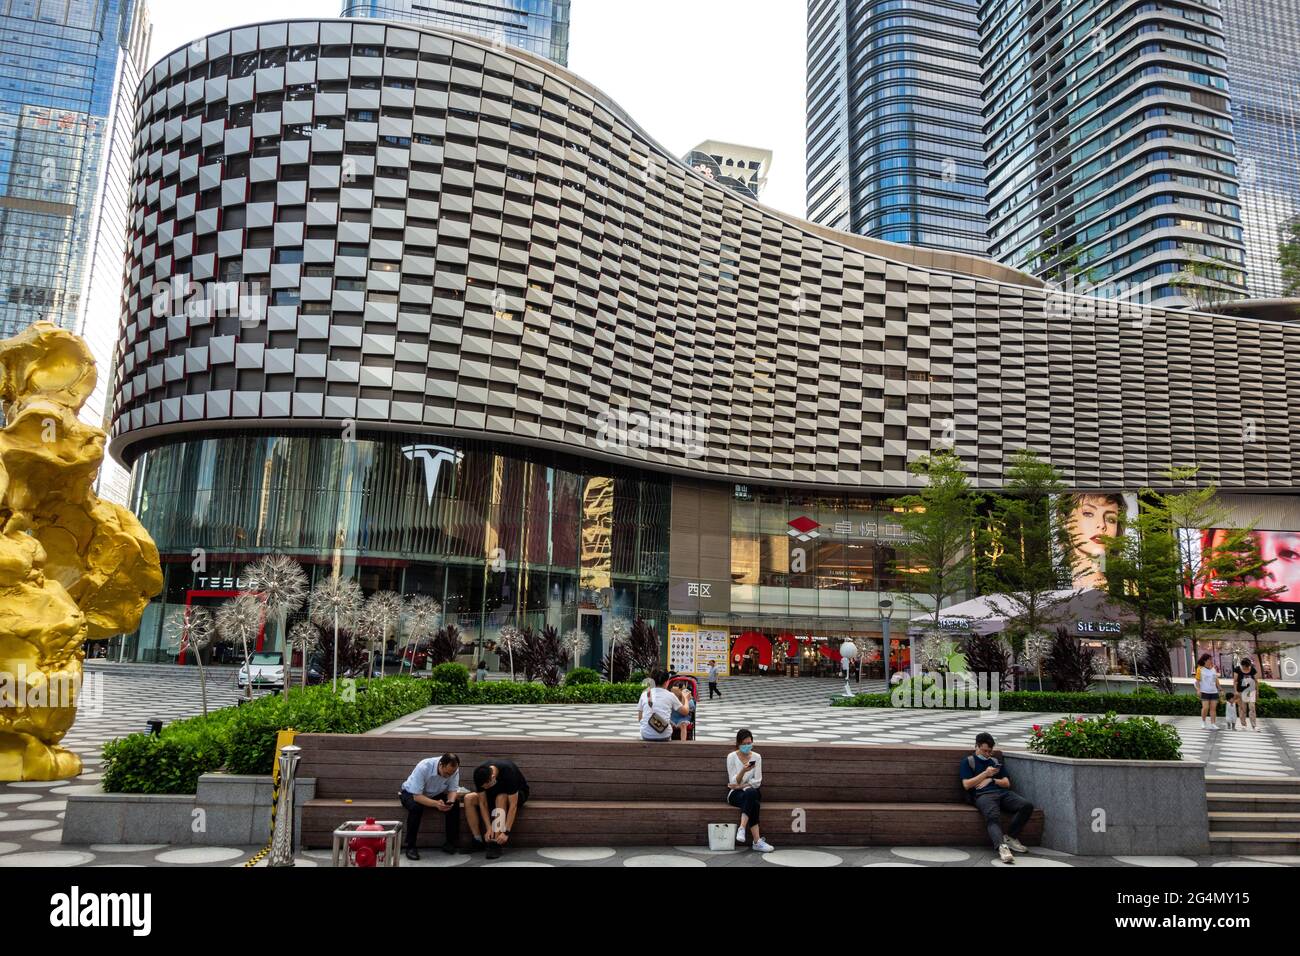 Exterior of modern shopping mall with people sitting in front in Shenzhen, China Stock Photo